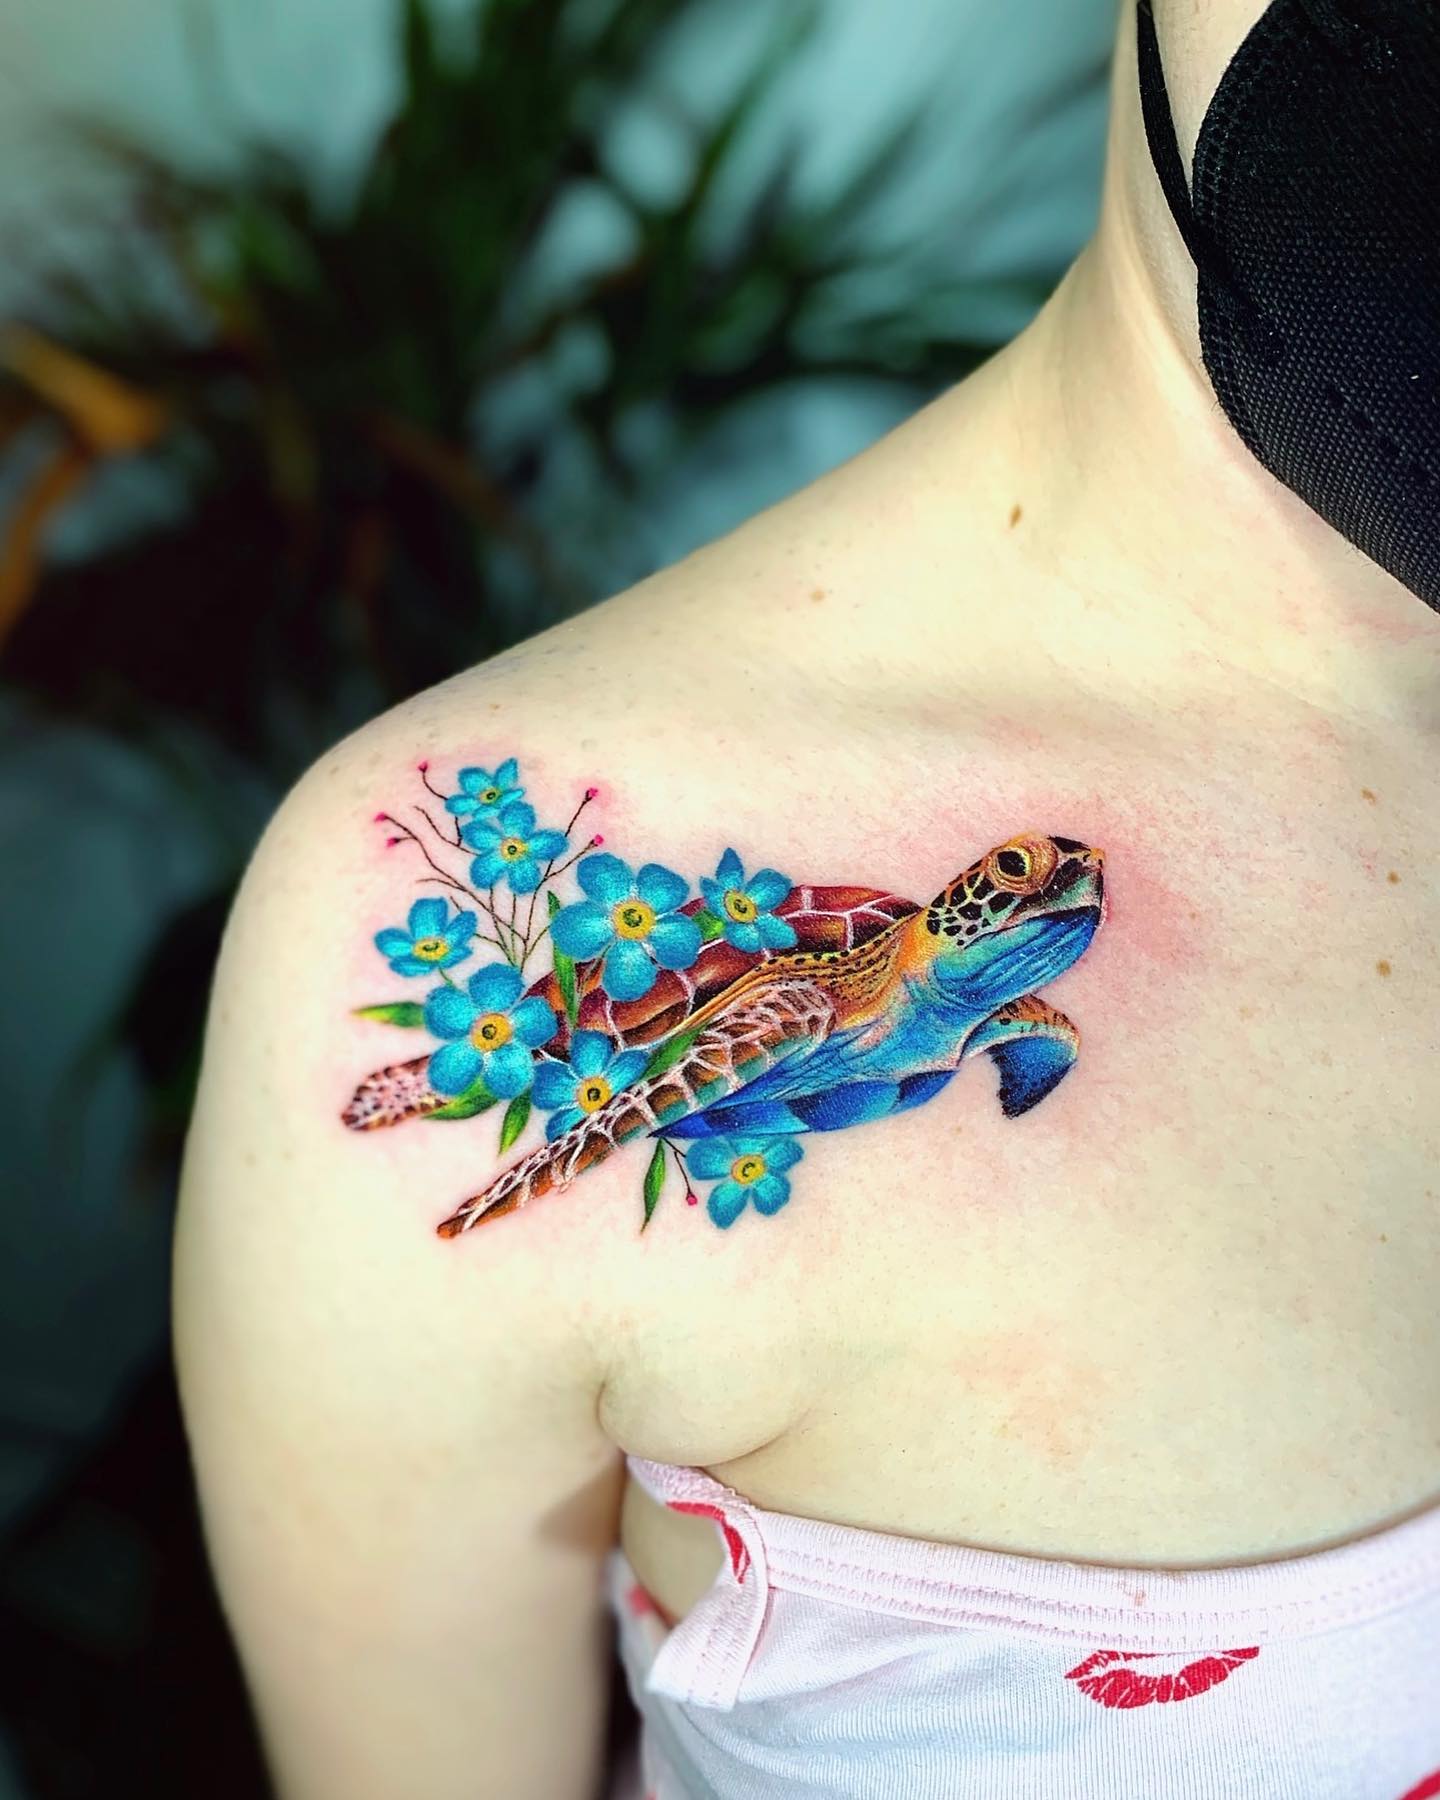 To cheer up your shoulder with something colorful, there is no better tattoo than a sea turtle. Blue flowers that are added on the shell look quite amazing. The colors and the way it looks like it's swimming through water with flowers are ready to warm your heart.